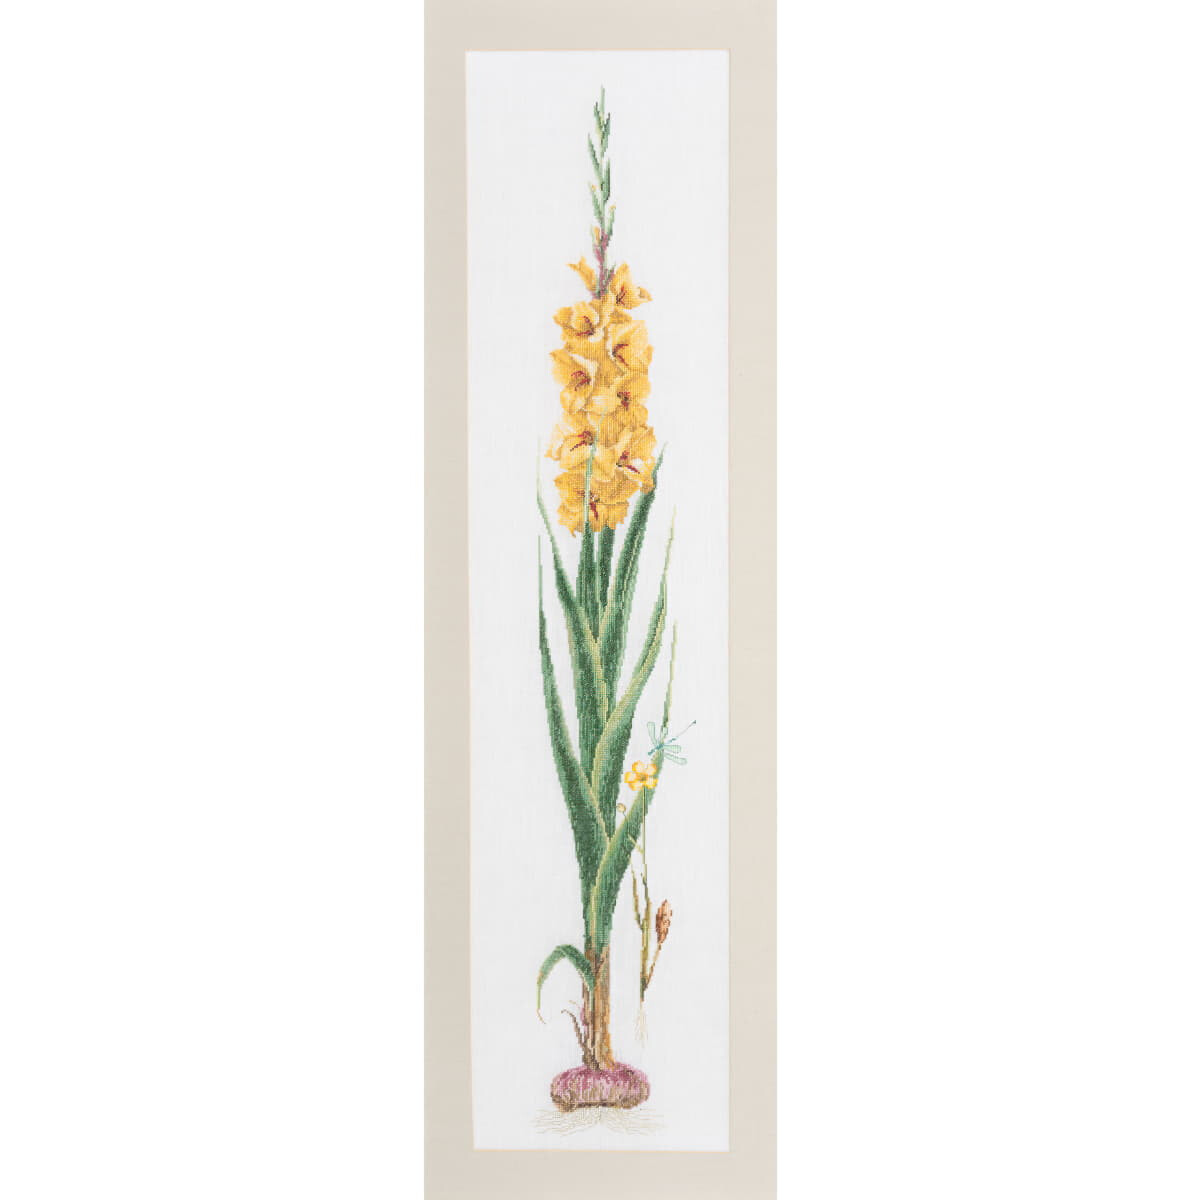 Thea Gouverneur counted cross stitch kit "Gladioli...